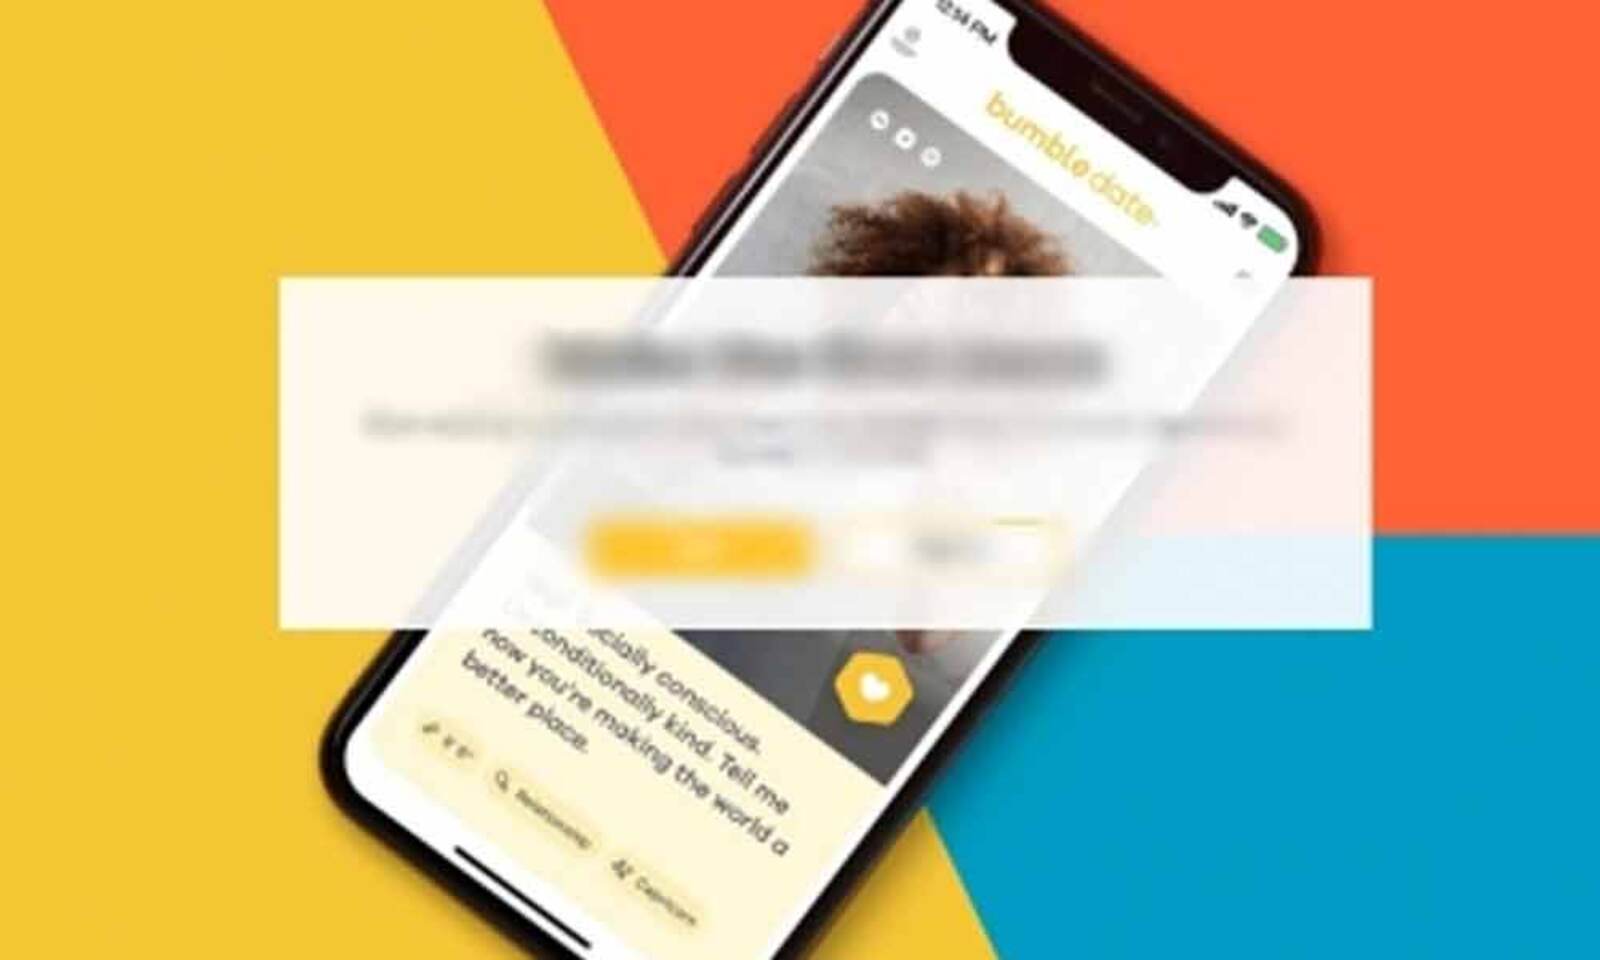 Bumble Dating App Exposed User Location